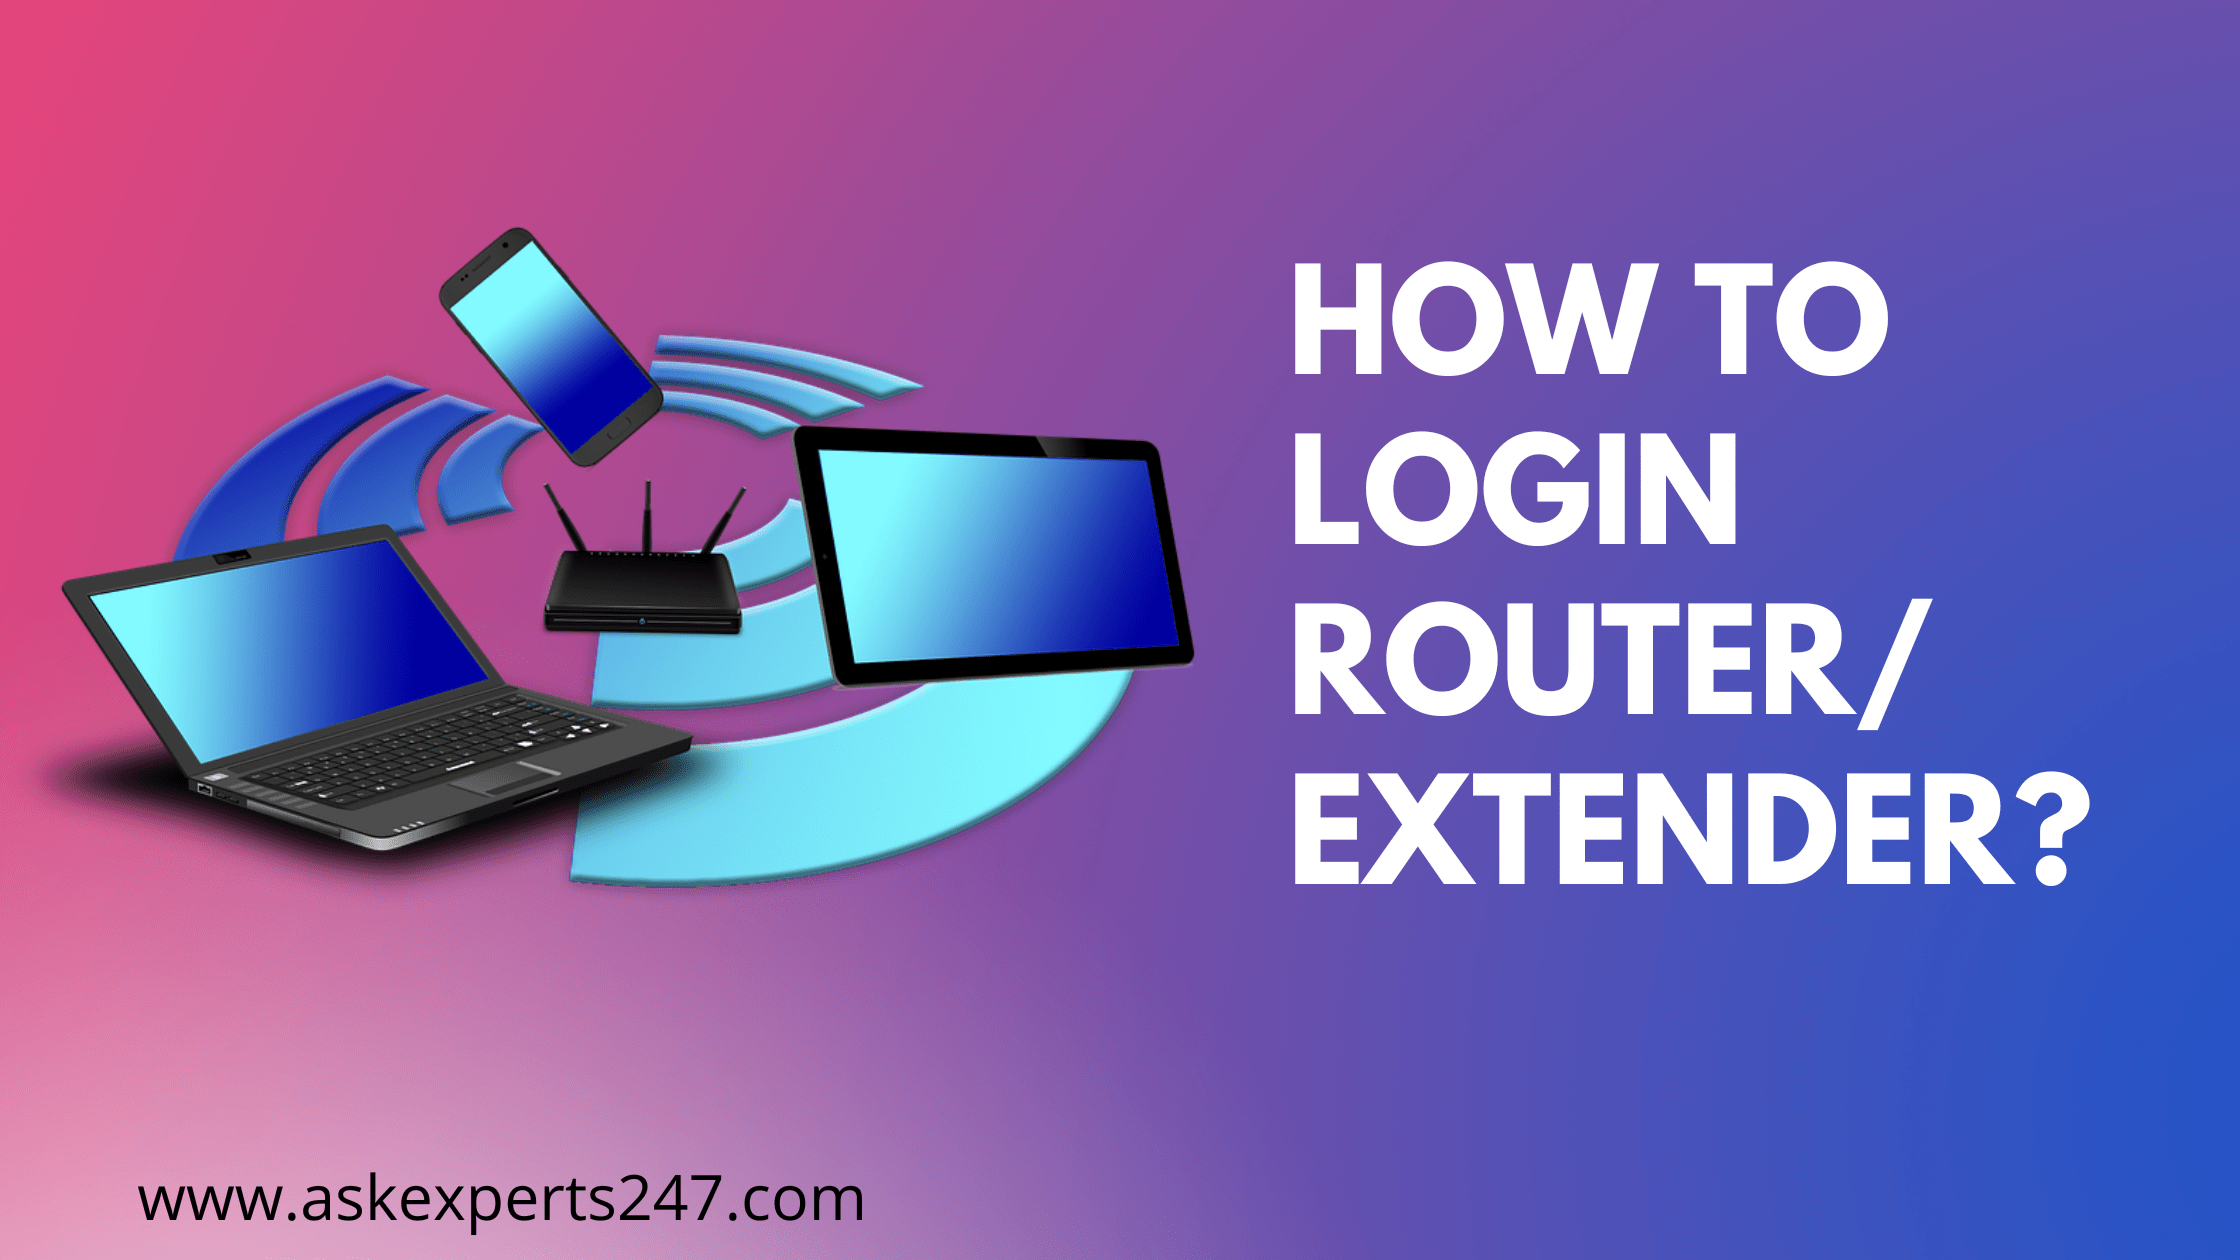 How to login Router/Extender?